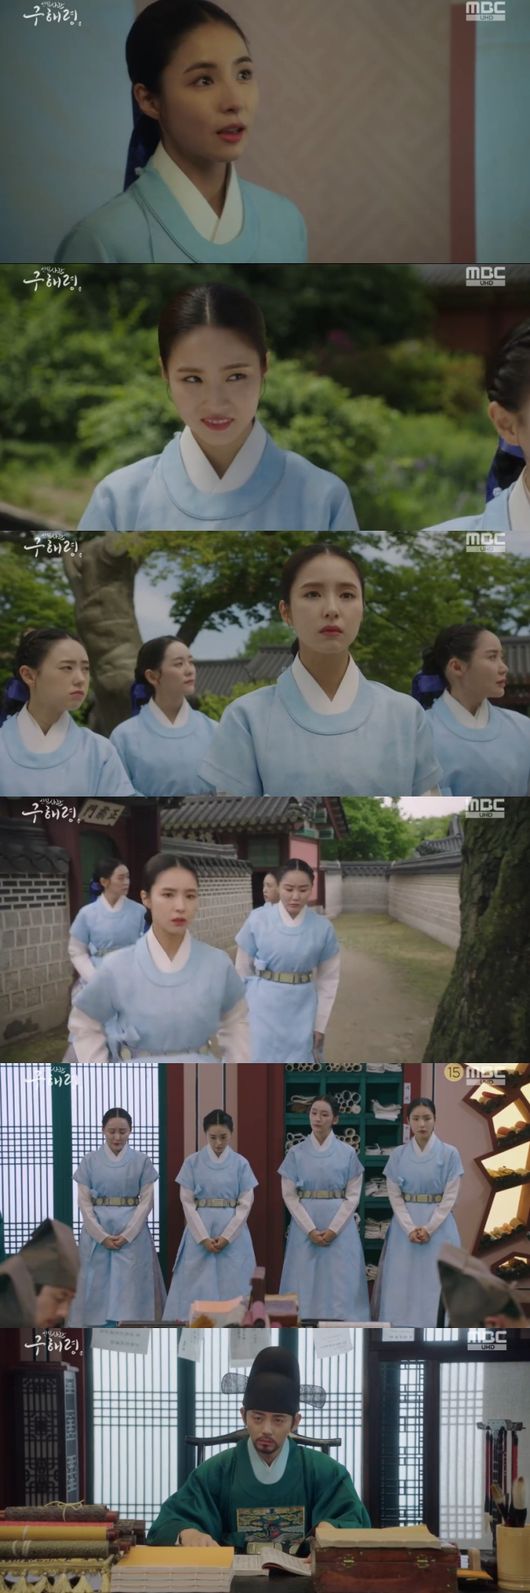 Shin Se-kyung, a new employee, was a subjective woman.MBCs drama Na Hae-ryung (played by Kim Ho-soo, directed by Kang Il-soo and Han Hyun-hee), which was broadcast on the afternoon of the 24th, featured a sudden restriction on the Ada Lovelace star poem by Na Hae-ryung (Shin Se-kyung).When Na Hae-ryung discovered that Ada Lovelace had been announced, he visited Wedding Bible opponent Sunbi and asked her to retire her marriage.Sunbee was embarrassed and embarrassed that marriage is a family agreement, and it is not something that can be done because it is not what I want or what I want.He then worried about the situation of the former Na Hae-ryung who was broken up.Eventually, Na Hae-ryung appeared in a hanbok dress without refusing to wear a Wedding Bible.Thanks to Sunbees surprise declaration, Koo could not marry: he refused Wedding Bible, saying, I cant marry this.The exhilarated old man Na Hae-ryung had a star-studded Ada Lovelace and made the planting of male officials uncomfortable.However, Crown Prince Lee Jin (Park Ki-woong) appeared and confirmed Na Hae-ryungs answer sheet directly.It is only a persons will to interpret natural phenomena, wrote Gu Na Hae-ryung, and because I dont know, I think its bad because Im afraid and afraid.Lee Jin sighed and brought Na Hae-ryung to the East Palace.Na Hae-ryung, who was nervous, said it straight.If you think there is a way to stop the eclipse, it is wrong, he said. People can not stop the sky, and old-fashioned ceremonies are not a way to end the eclipse.Lee Jin said, Old rituals are a way to comfort the people, and learning and acquiring knowledge through bookkeeping is also a way for those who have grown up precious.Na Hae-ryung was shocked and did not answer.After that, a classmate was announced, and Koo Hae-ryung was called and was greatly pleased. Among the people who took the test together, Song Sa-hee (Park Ji-hyun) gave a general salary.Ada Lovelace, including Na Hae-ryung and Song Sa-hee, were not treated by existing male officials and were laughed at.In addition, officials did not handle the management of Ada Lovelace.Na Hae-ryung had a big drink against Yang Si-haeng (Heo Jeong-do), but he won the mental fight and smiled at the conversion.Capture a screen of the new employee Na Hae-ryung